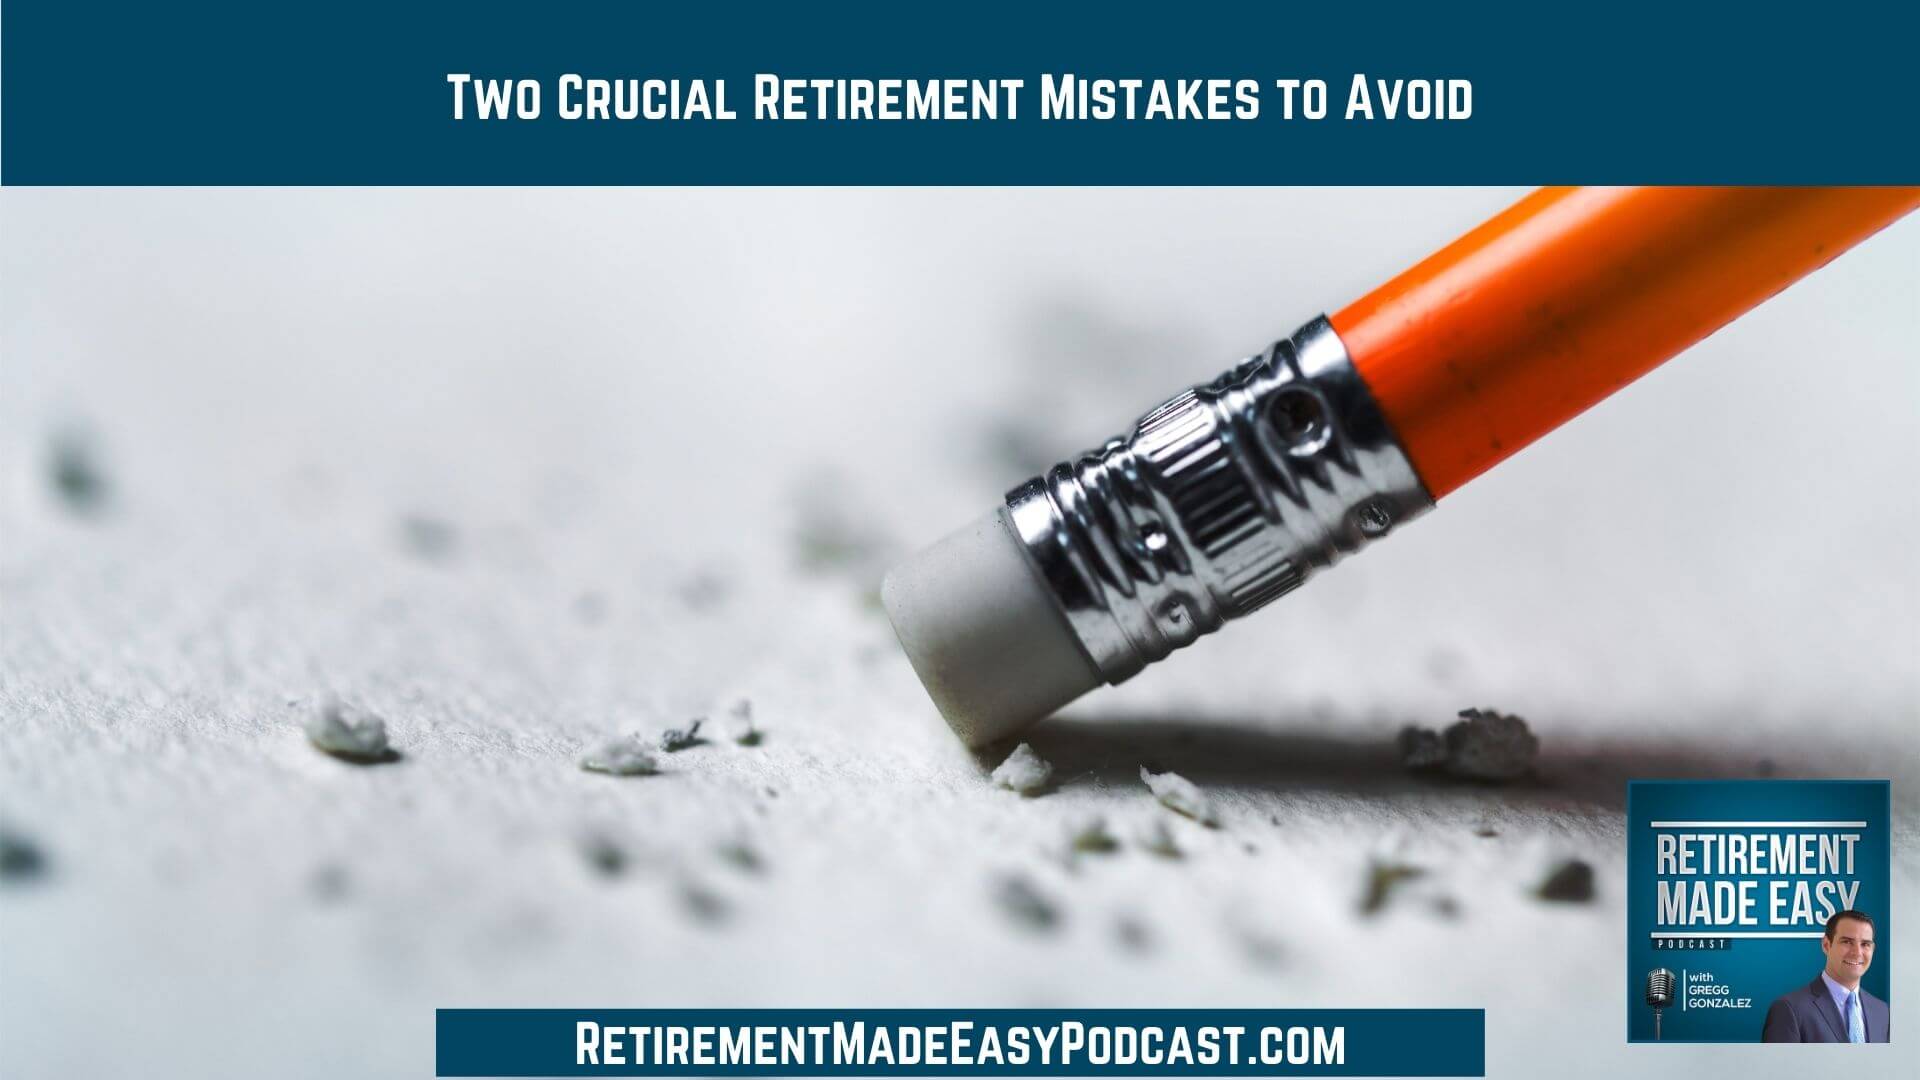 Two Crucial Retirement Mistakes to Avoid